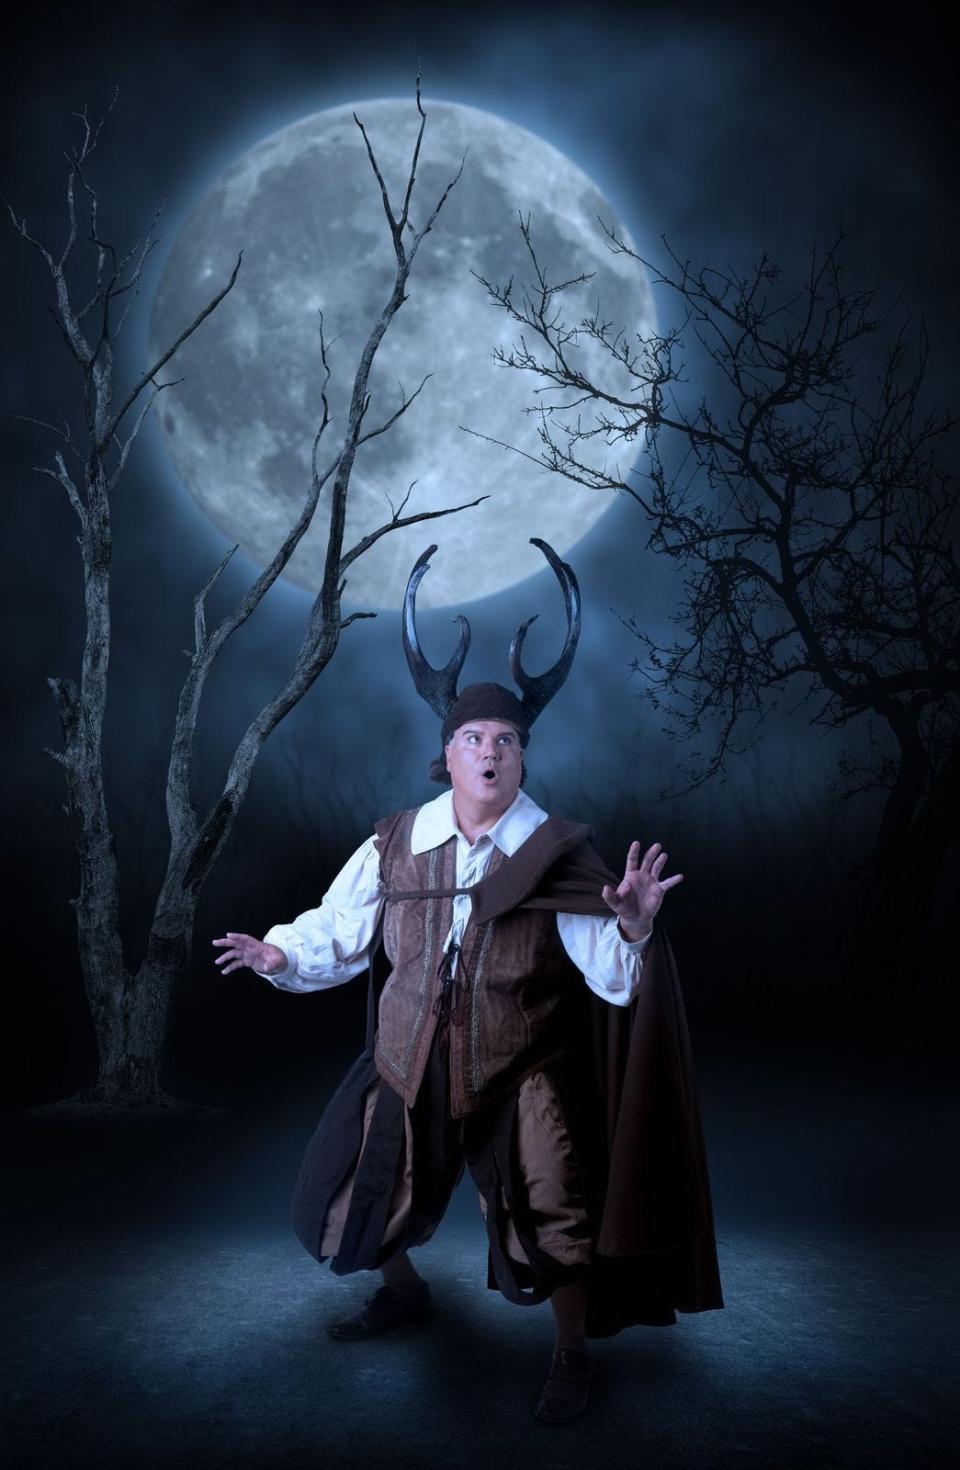 Michael Chioldi (pictured here) stars as the title character in Palm Beach Opera’s production of “Falstaff” March 24 through 26 at the Kravis Center for the Performing Arts.